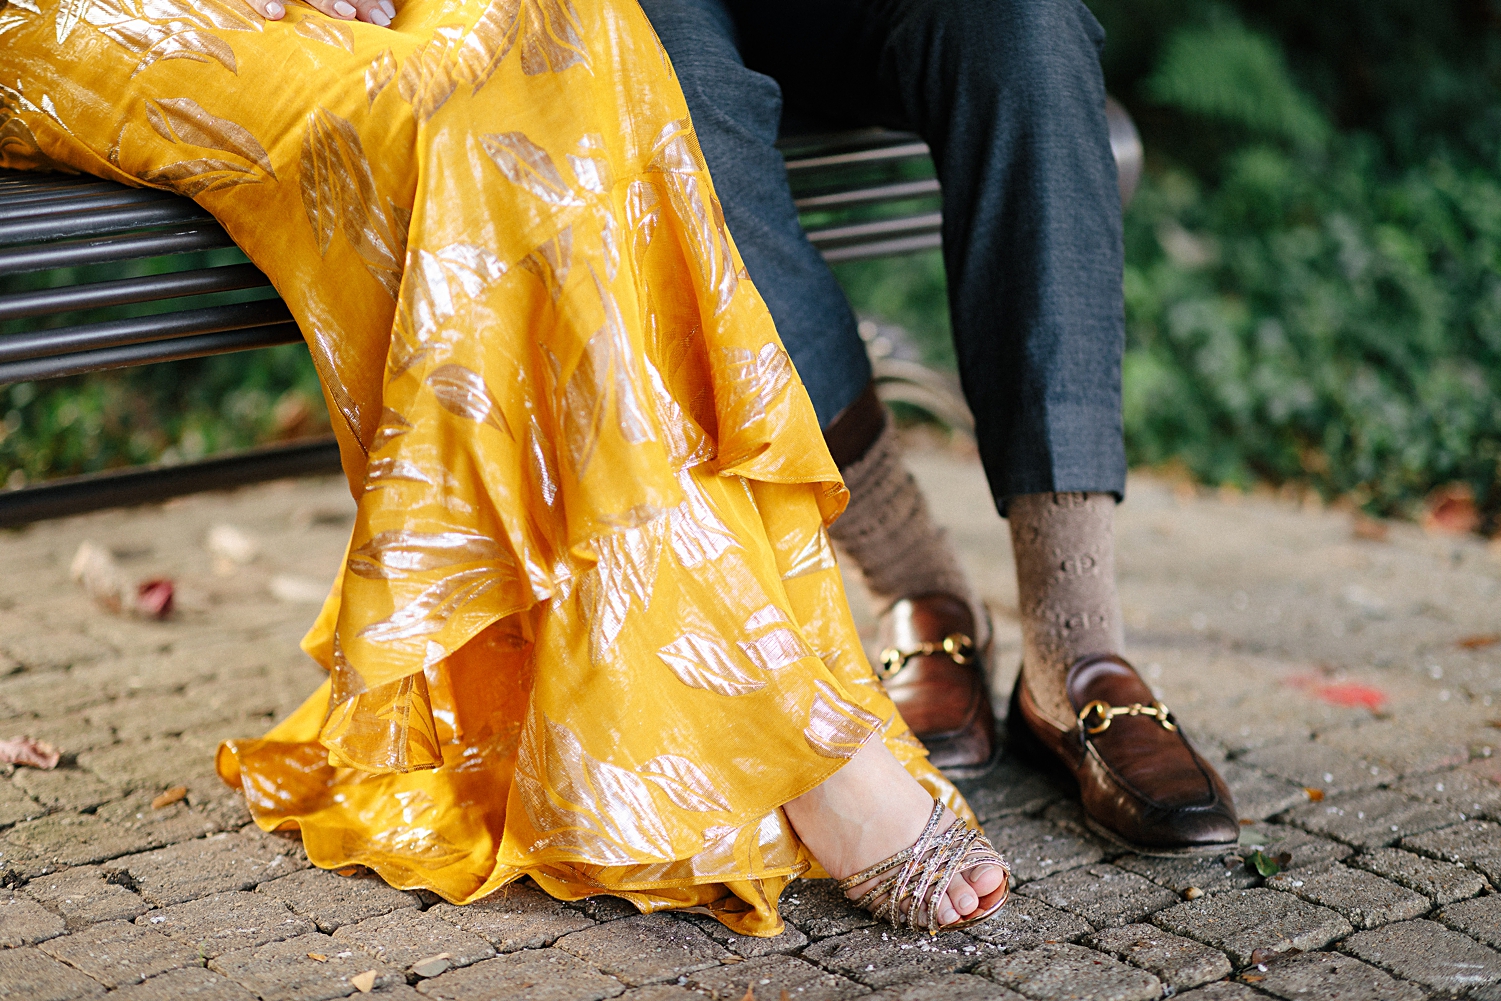 shoes on feet of man and woman in yellow dress sitting on park bench